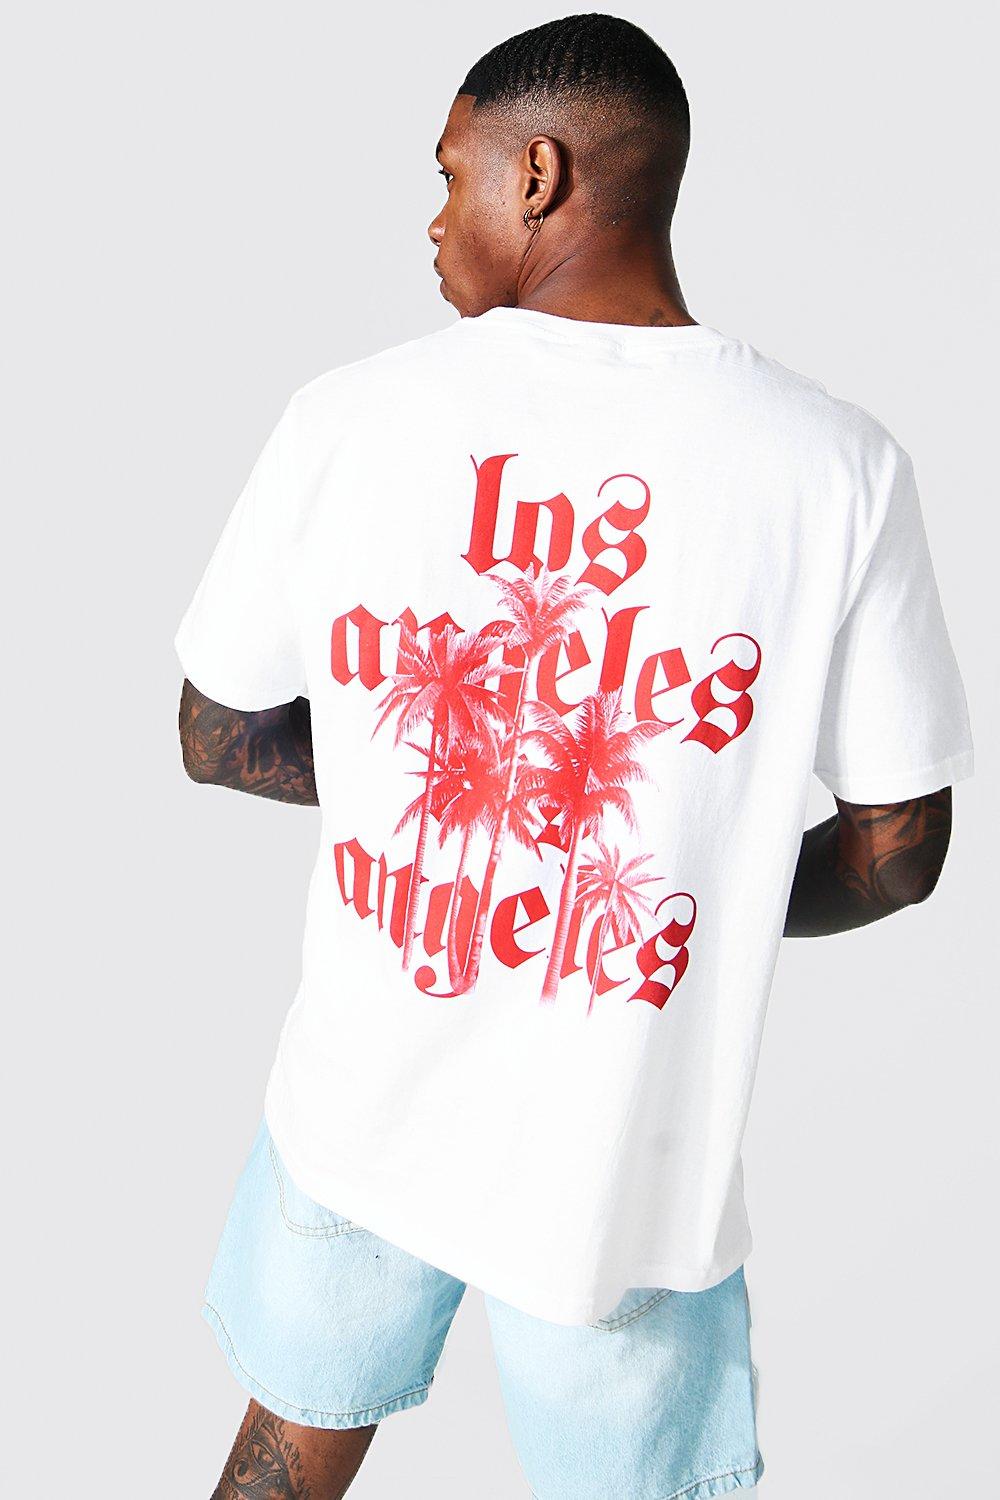 Profile White/Red Los Angeles Angels Plus Size Colorblock T-Shirt